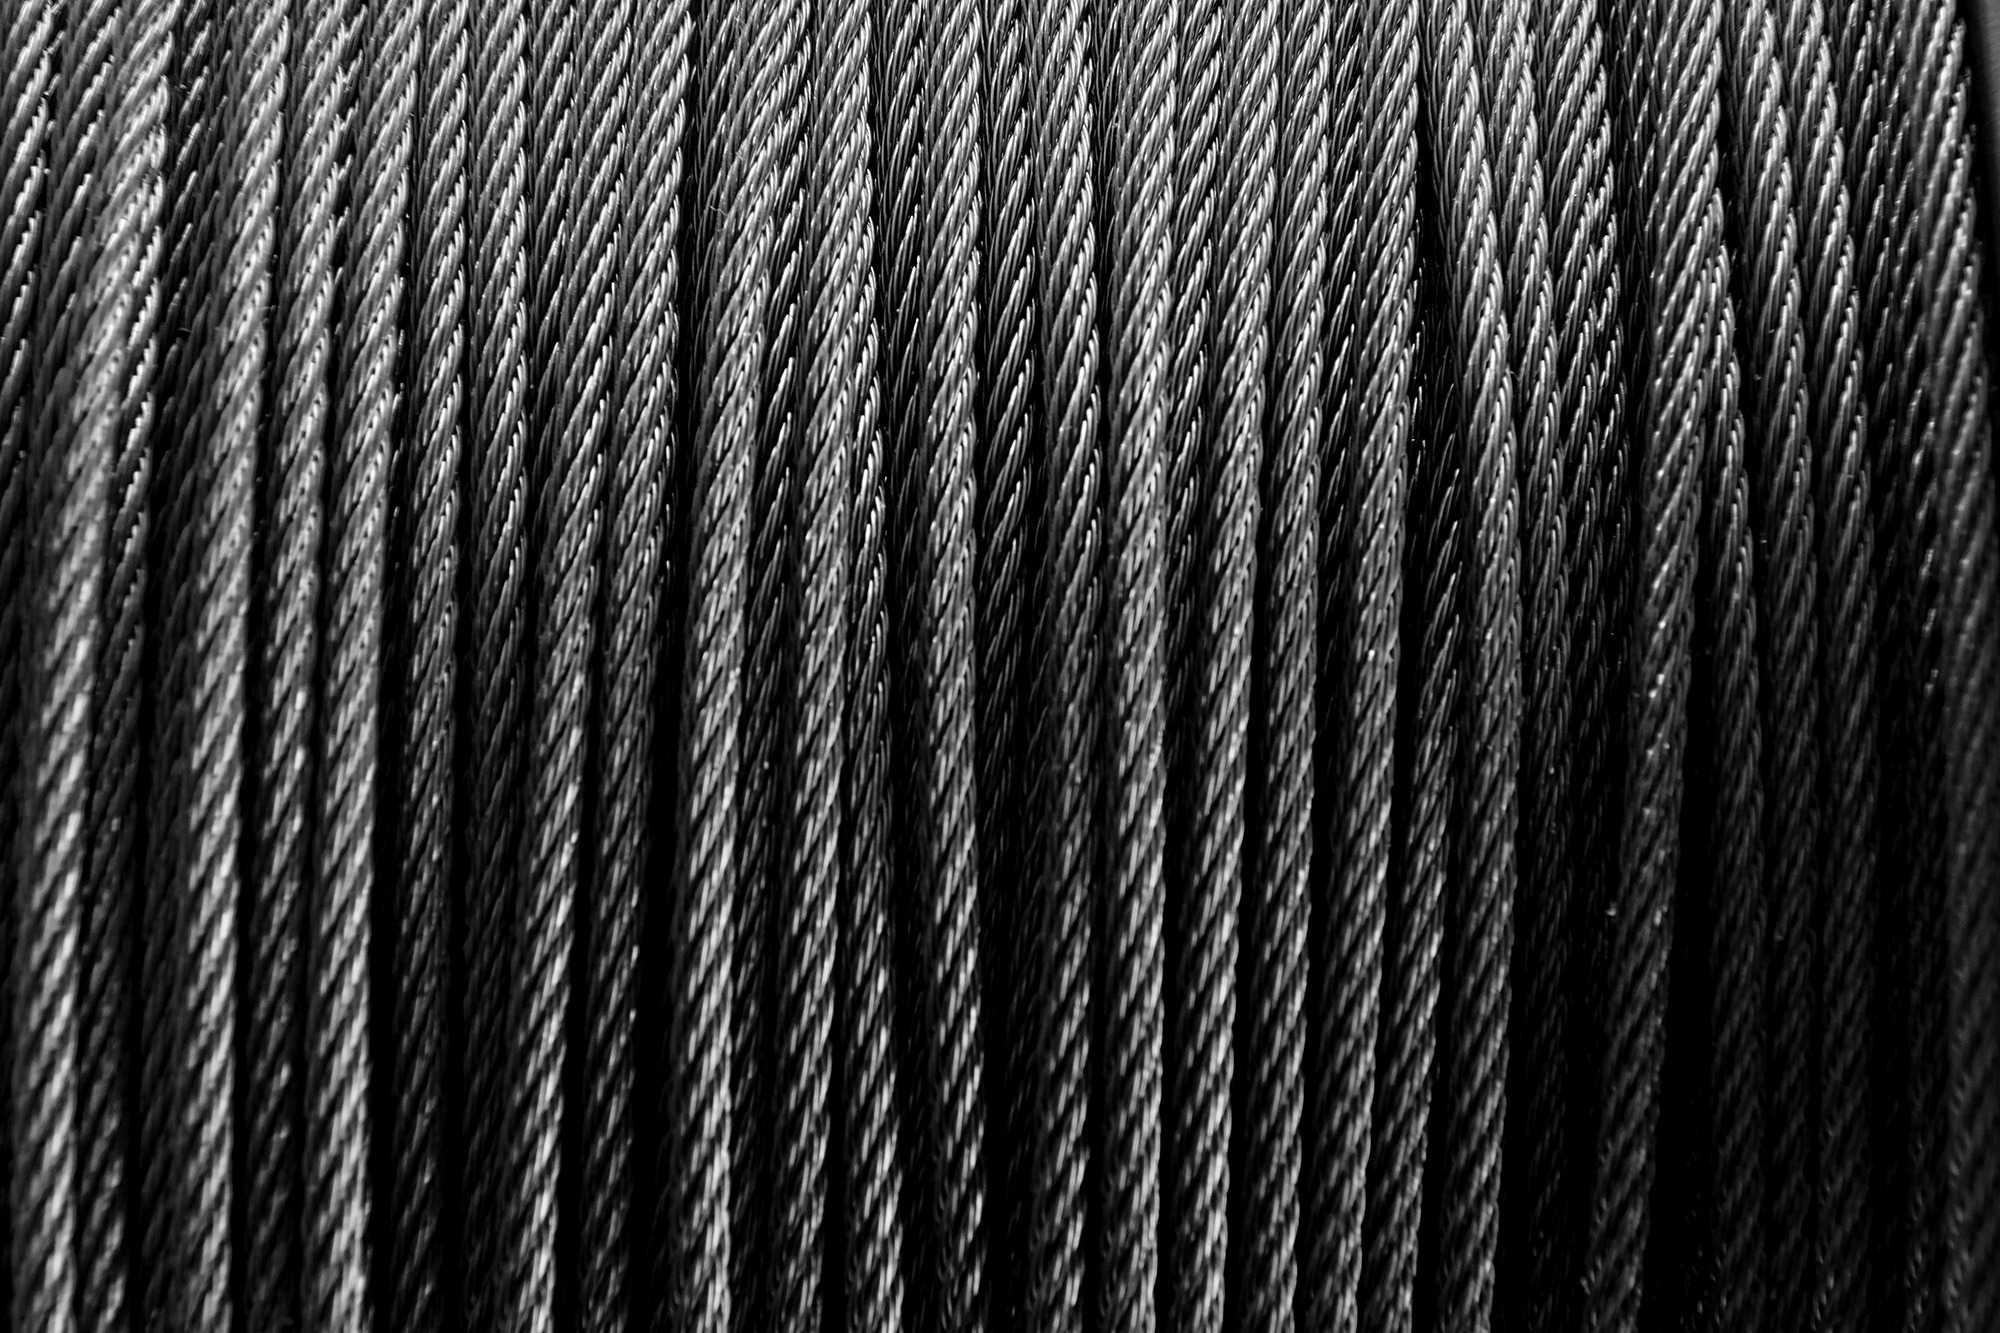 Nickel® 270 is available in bars and wire rope